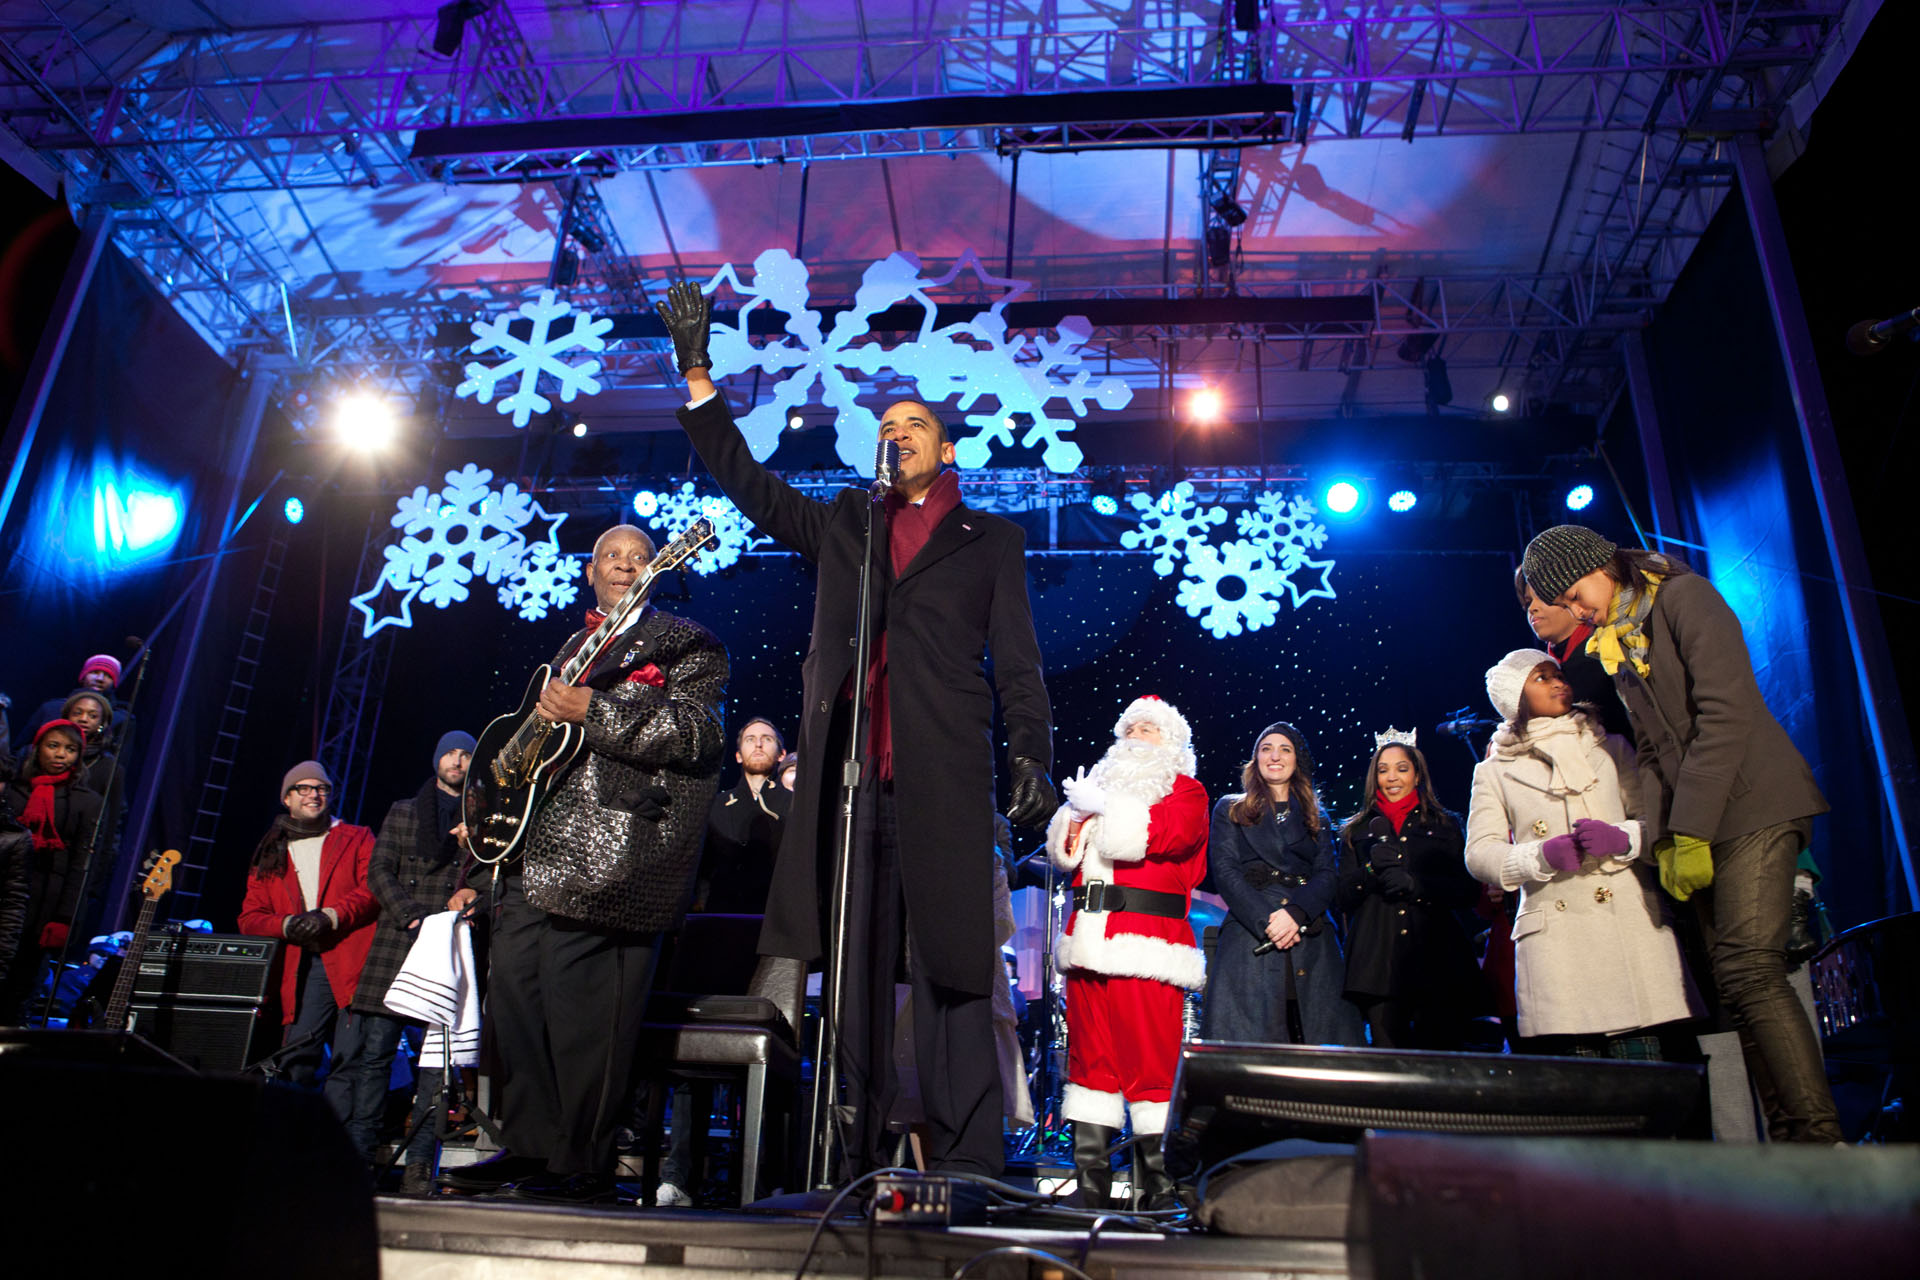 The President On Stage at the National Christmas Tree Lighting